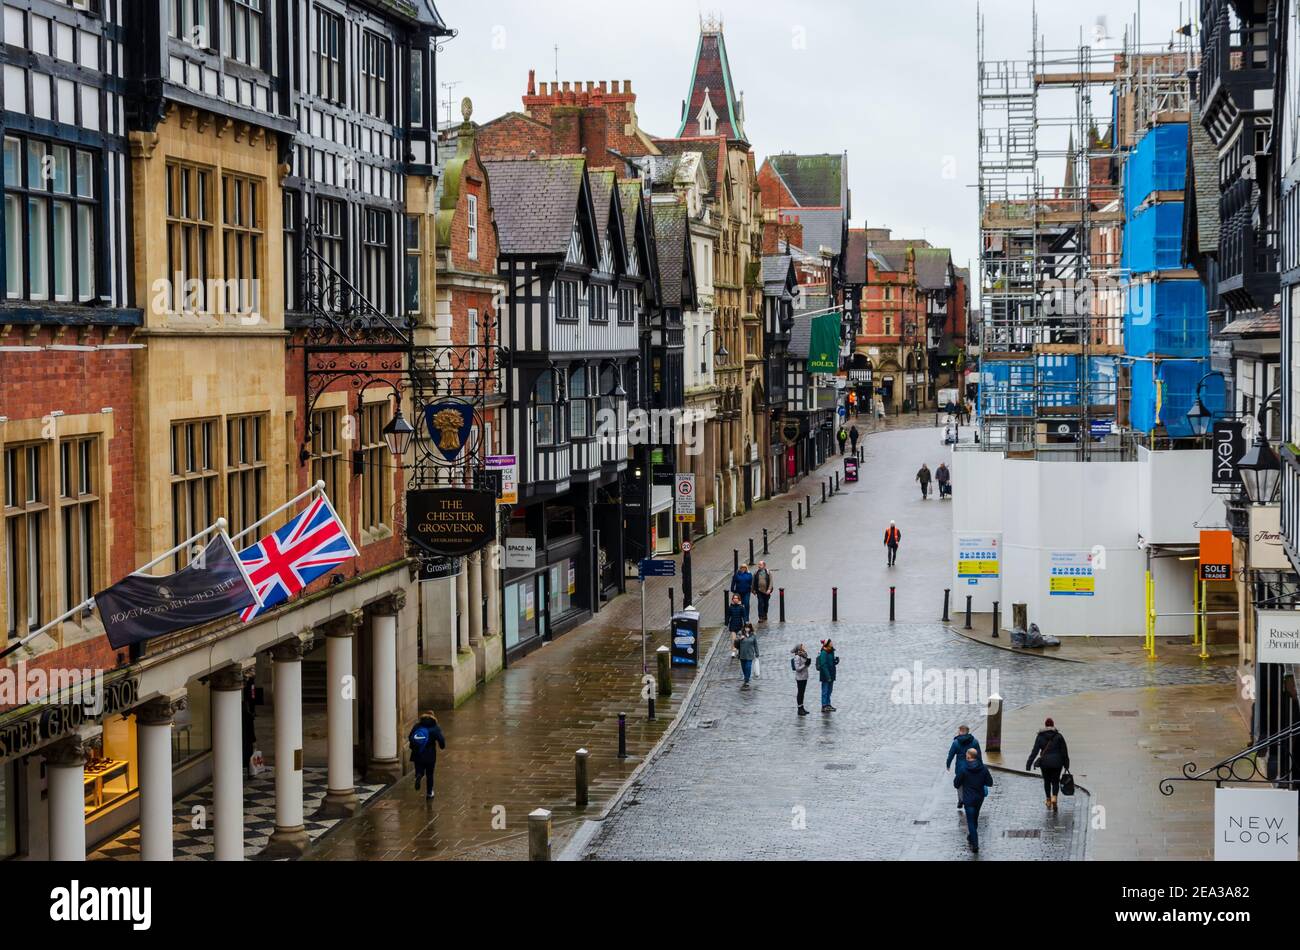 Chester; UK: Jan 29, 2021: A general view in the shopping district of Chester seen on a January Friday afternoon. Most people are staying at home duri Stock Photo